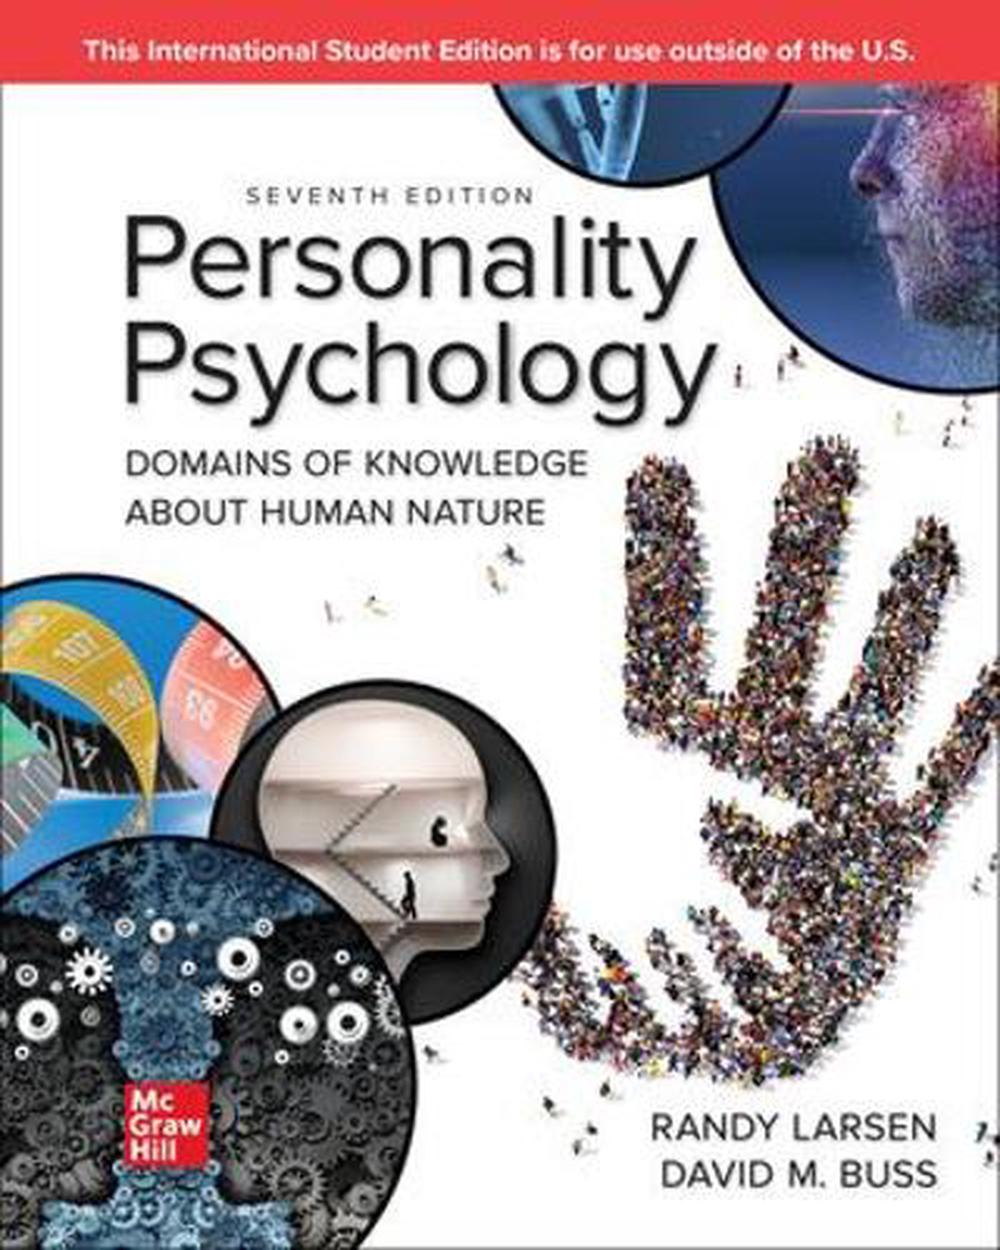 Buy　online　Nile　About　by　Human　Domains　Psychology:　Personality　at　Larsen,　9781260570427　The　Knowledge　Randy　Nature　Paperback,　ISE　of